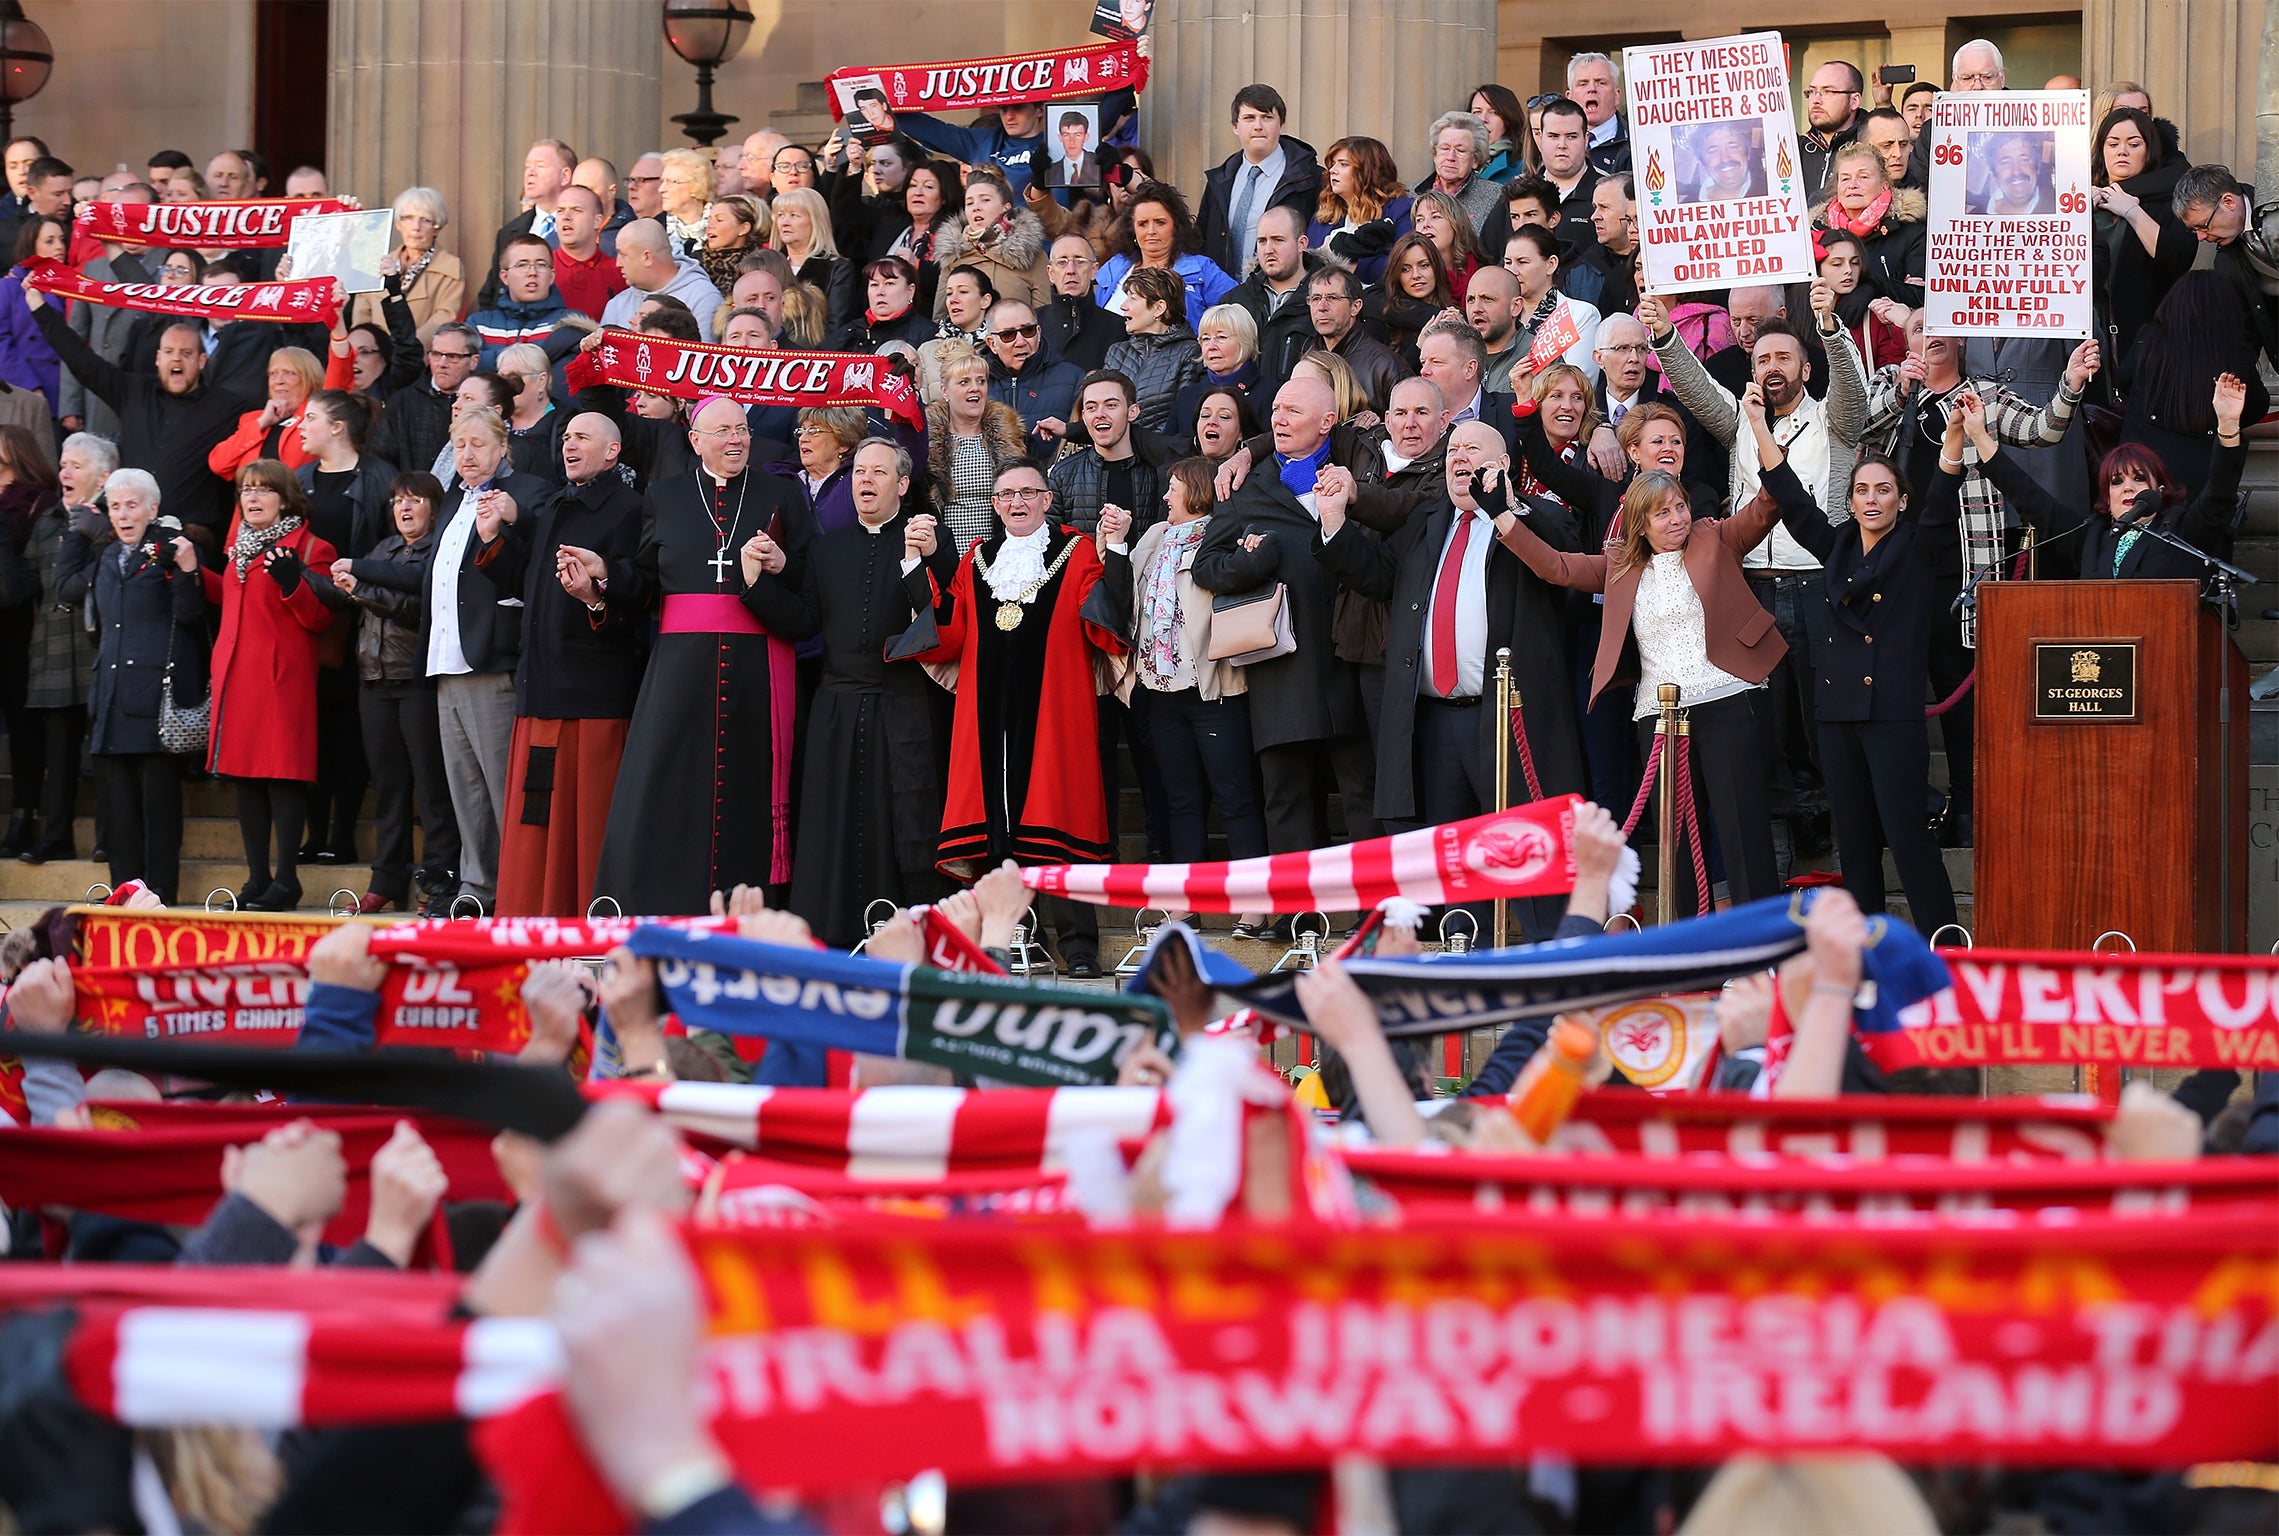 'You'll never walk alone' is sung by the thousands gathered at Saint George's Hall